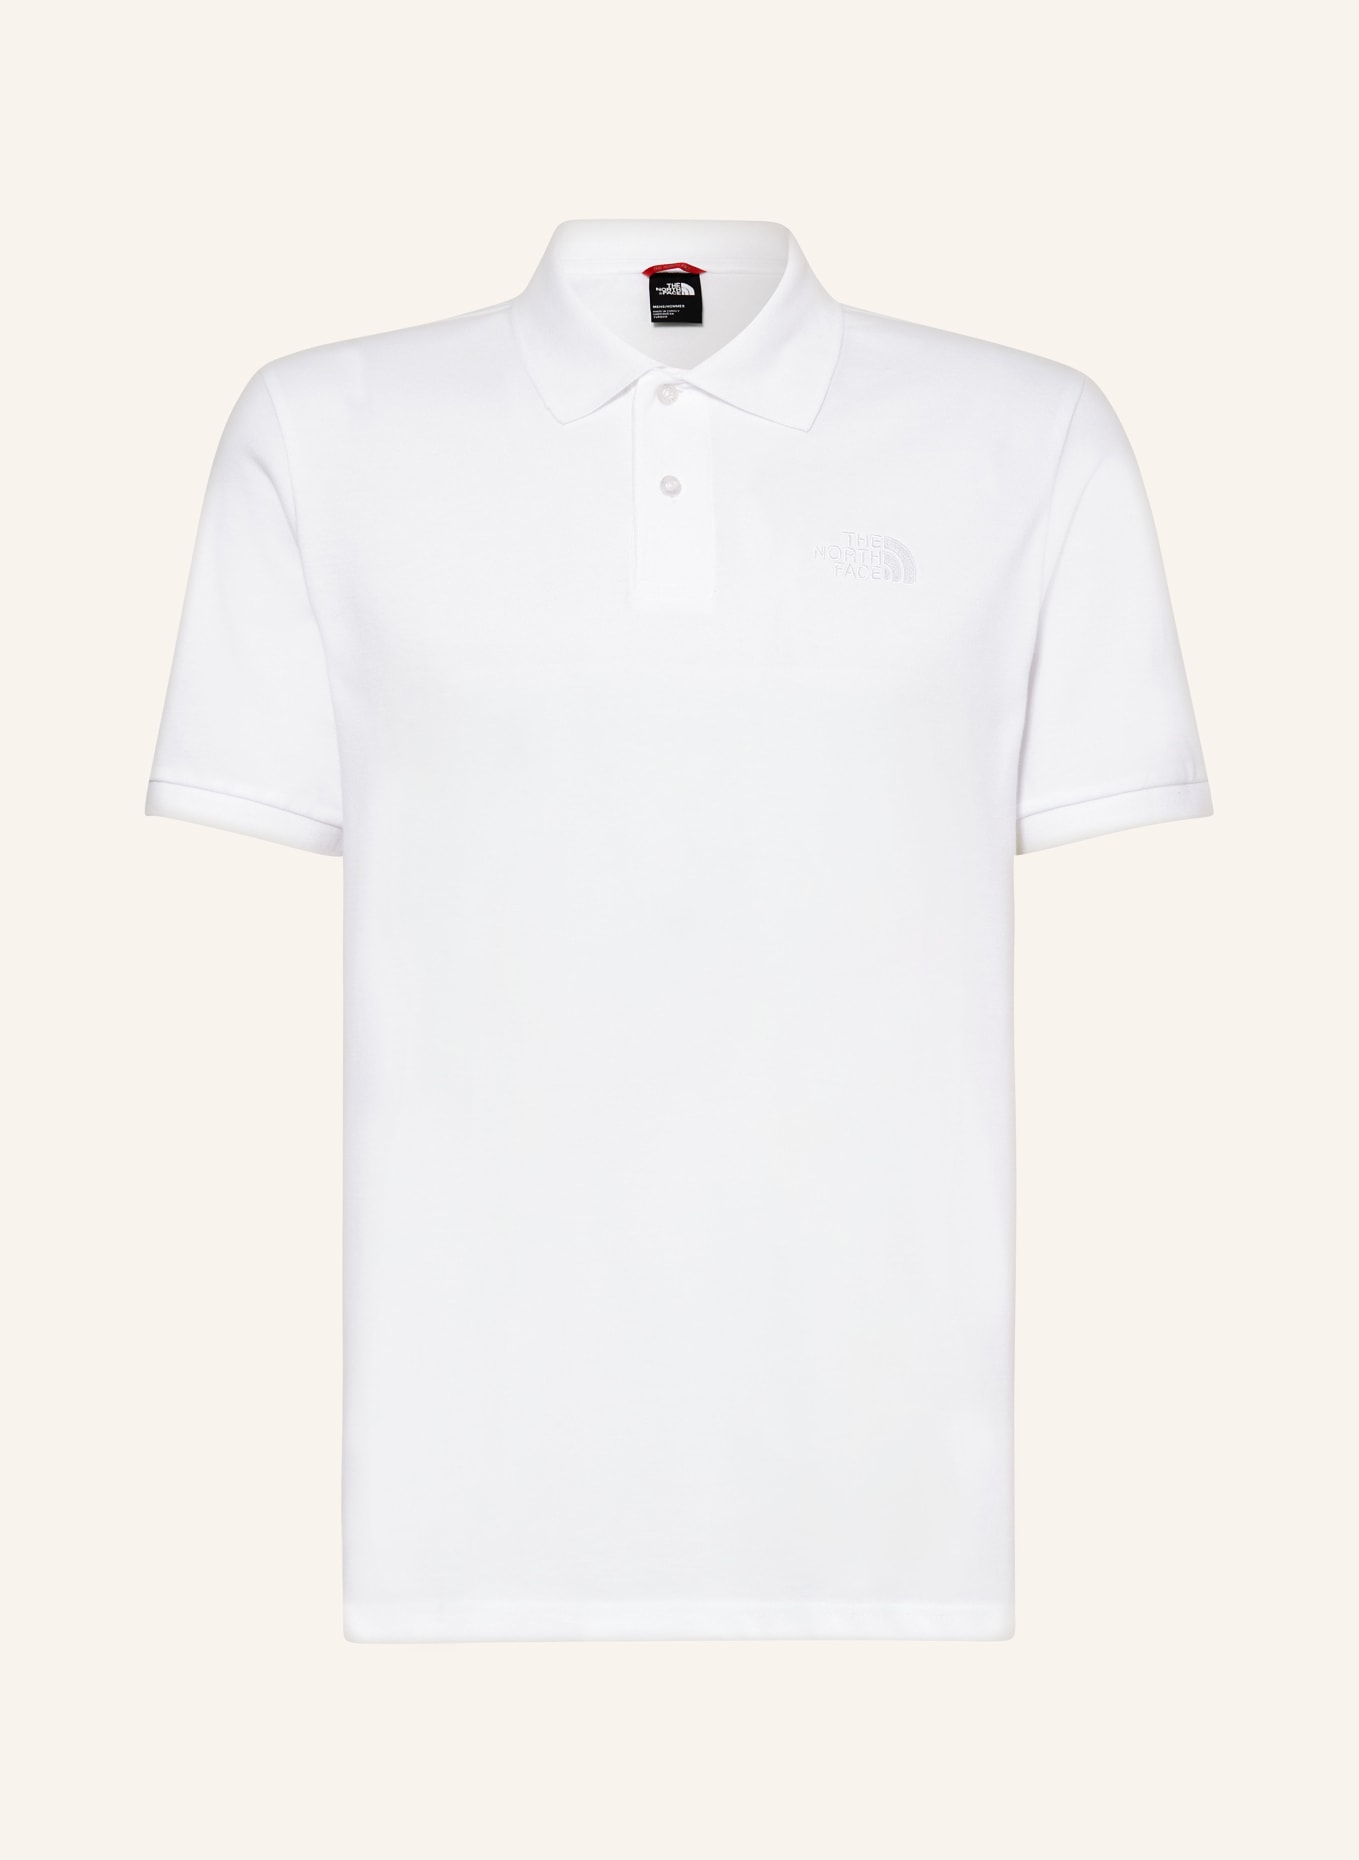 THE NORTH FACE Funktions-Poloshirt, Farbe: WEISS (Bild 1)